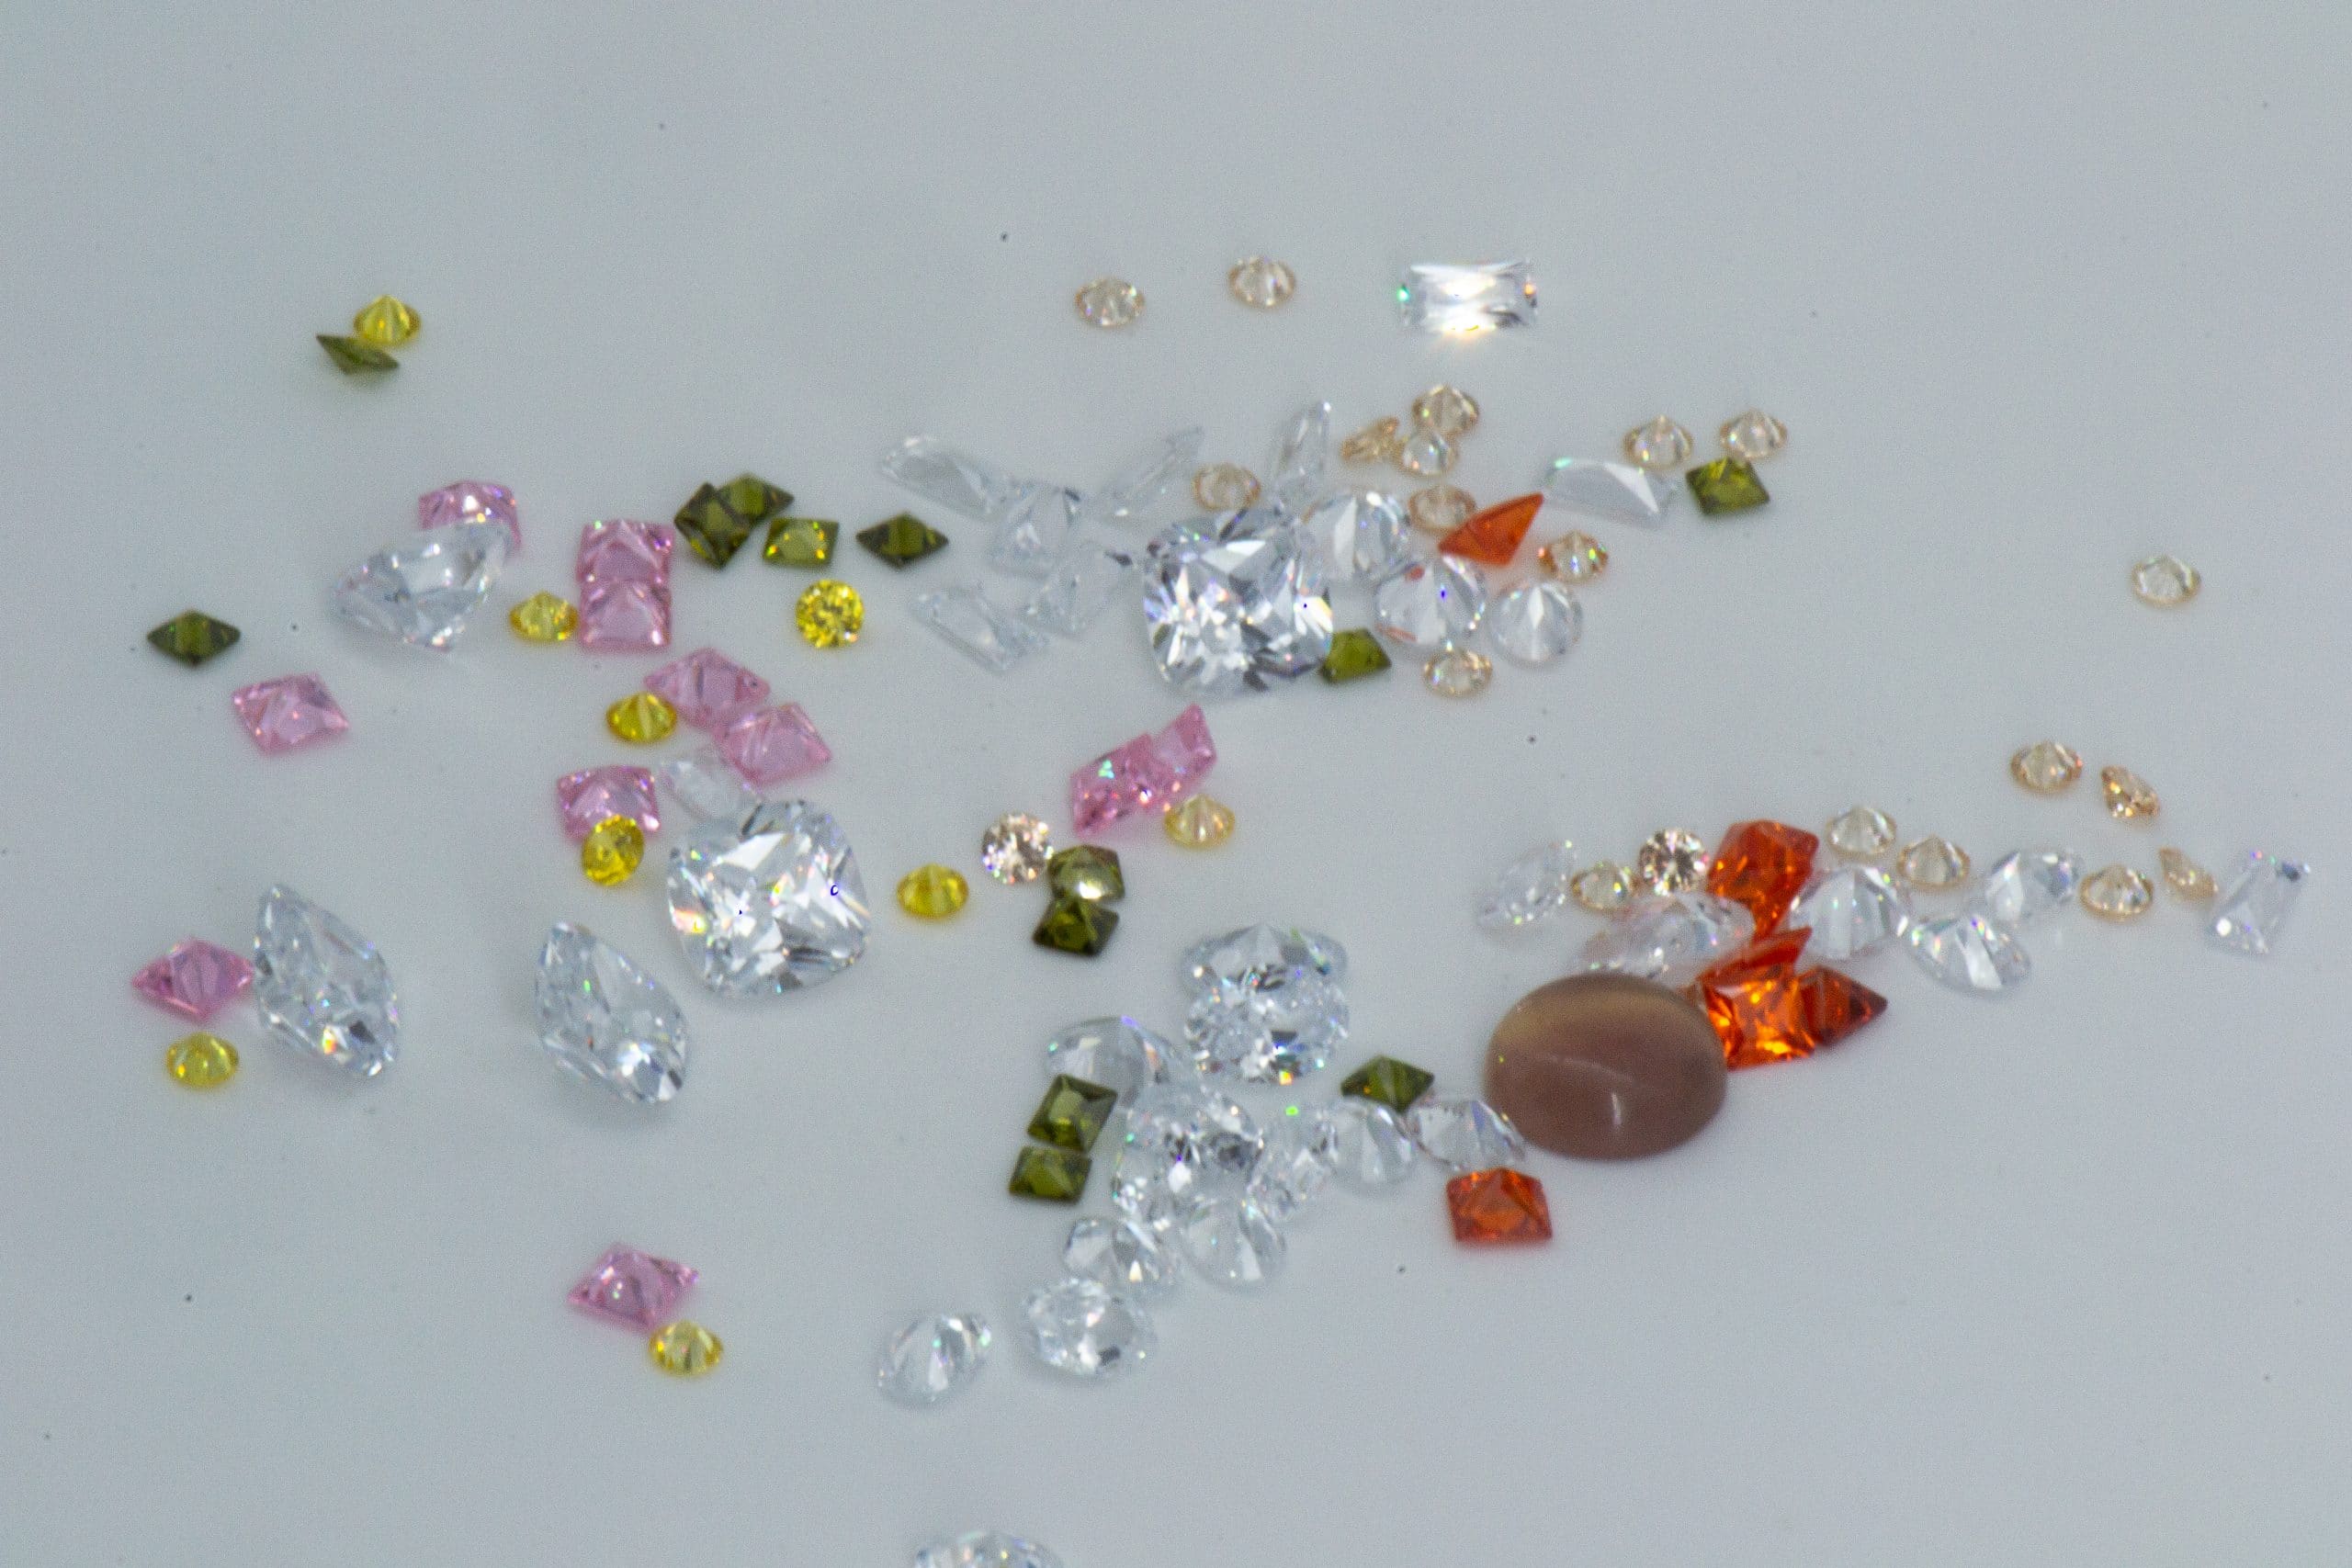 Cubic zirconia are sustainable sparkling and hardwearing gemstones